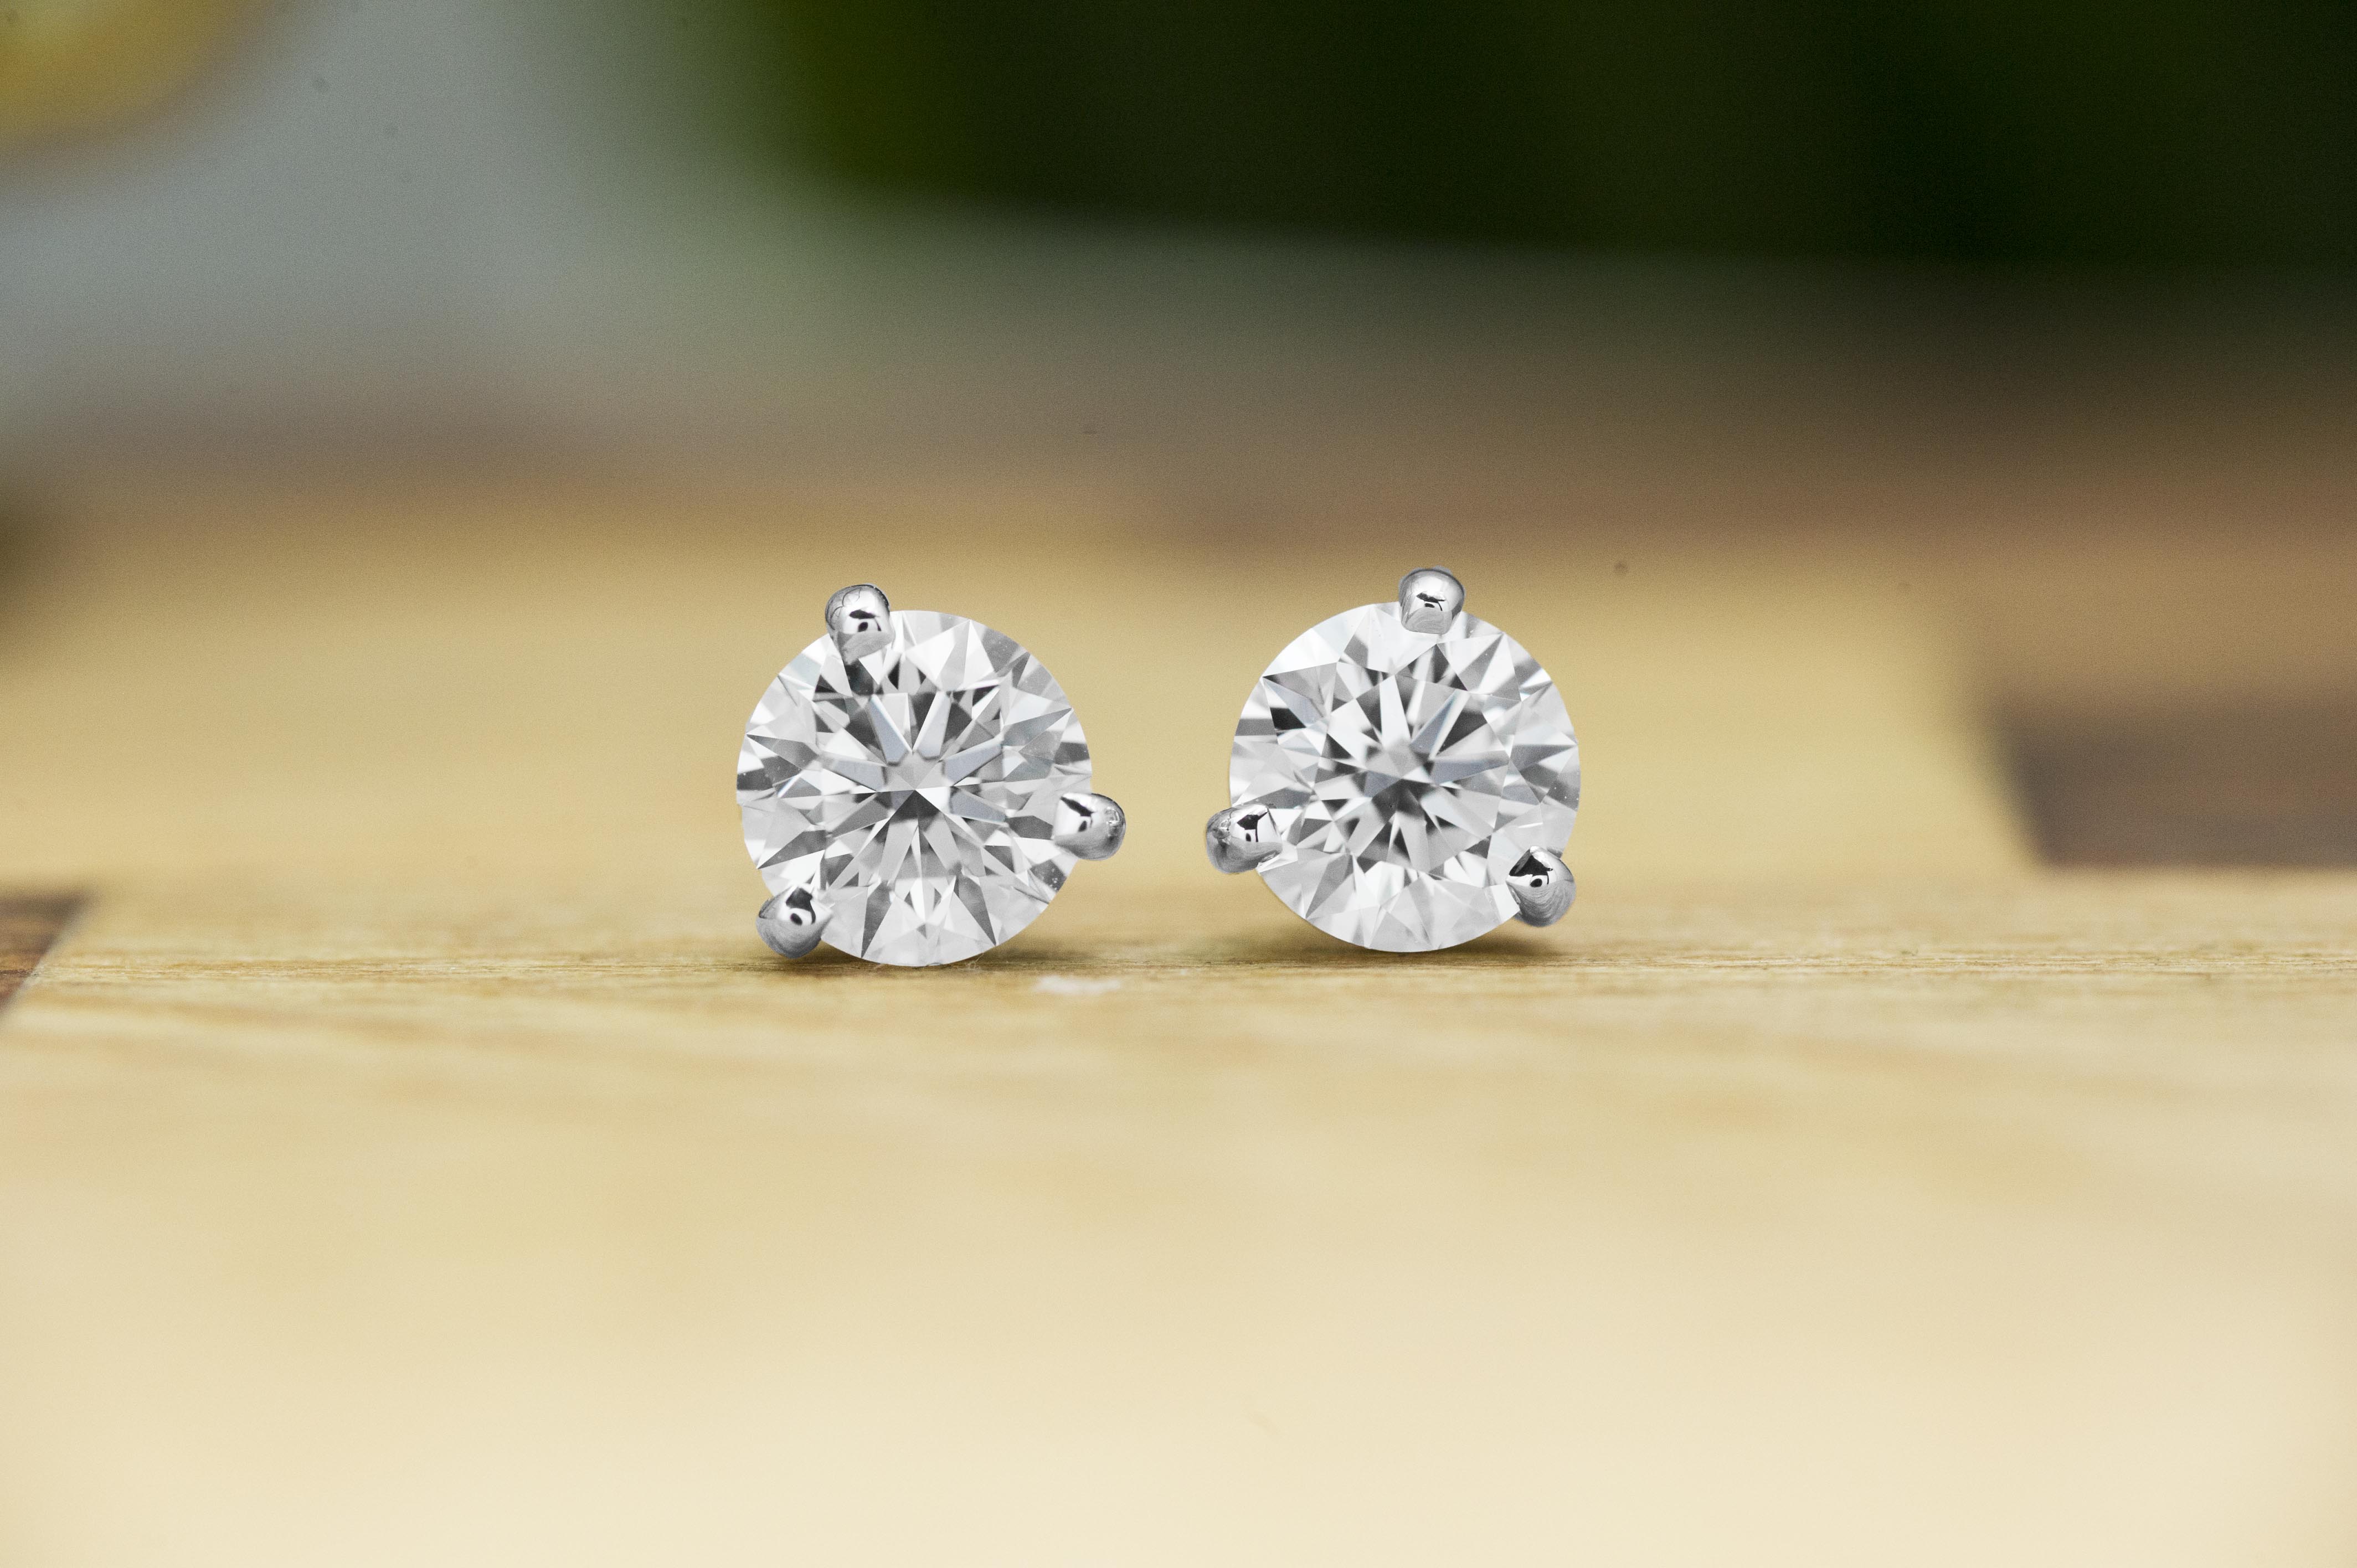 White gold diamond earrings placed on a wooden table